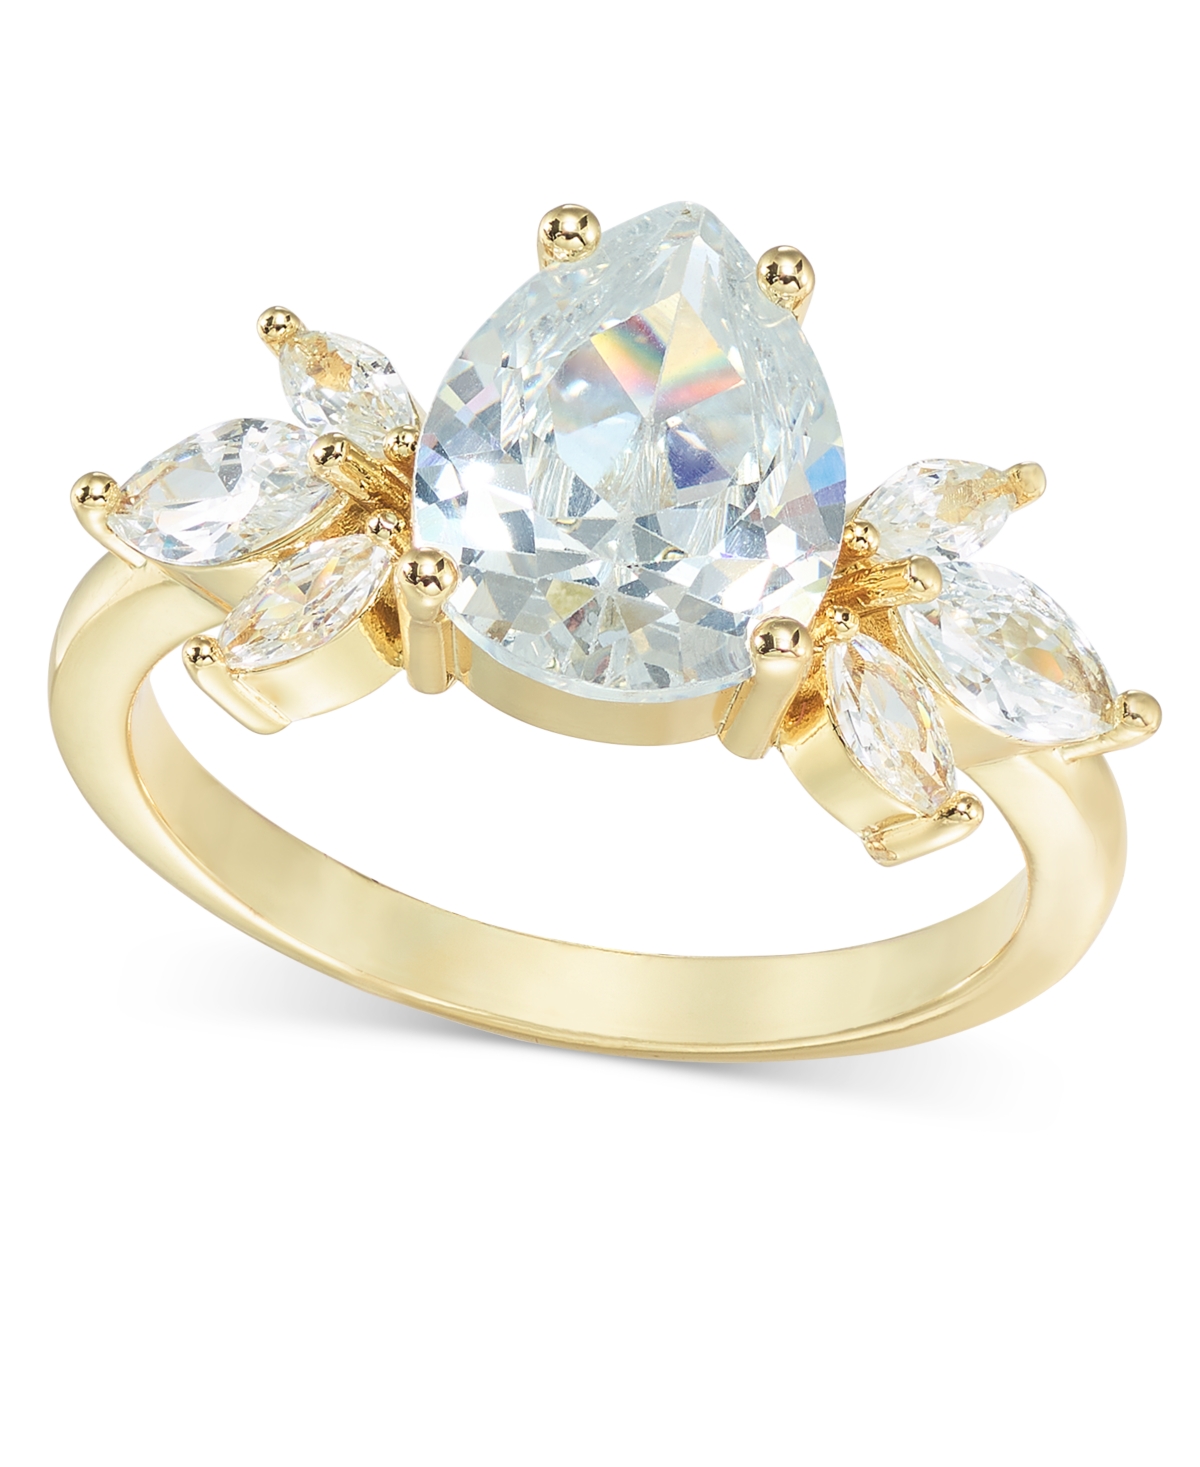 Gold-Tone Cubic Zirconia Cluster Ring, Created for Macy's - Gold